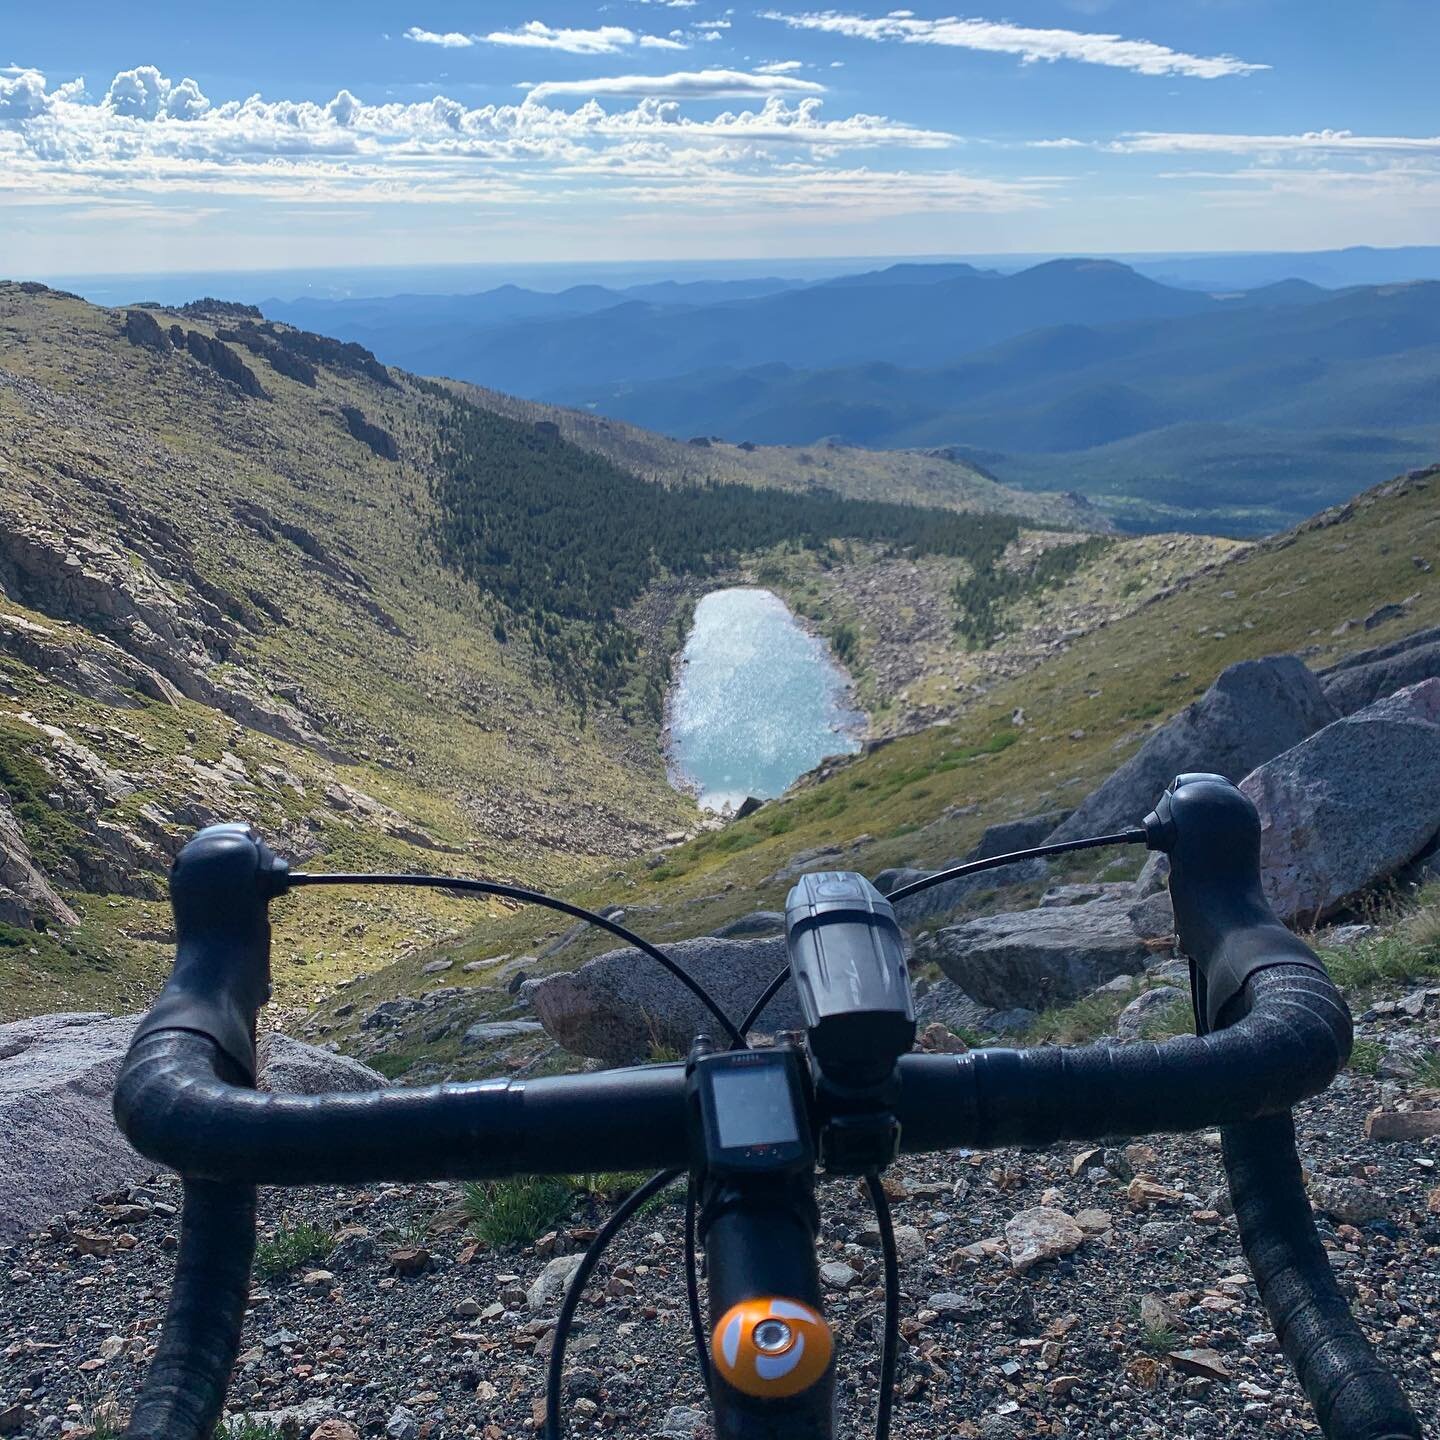 Who&rsquo;s getting outside this weekend!?
.
To all my road bikers: This photo is from biking up Mount Evans...the road is closed to cars and open for bikers (and hikers) for 2020! Get out there and explore - it&rsquo;s a great ride!
.
Are you feelin